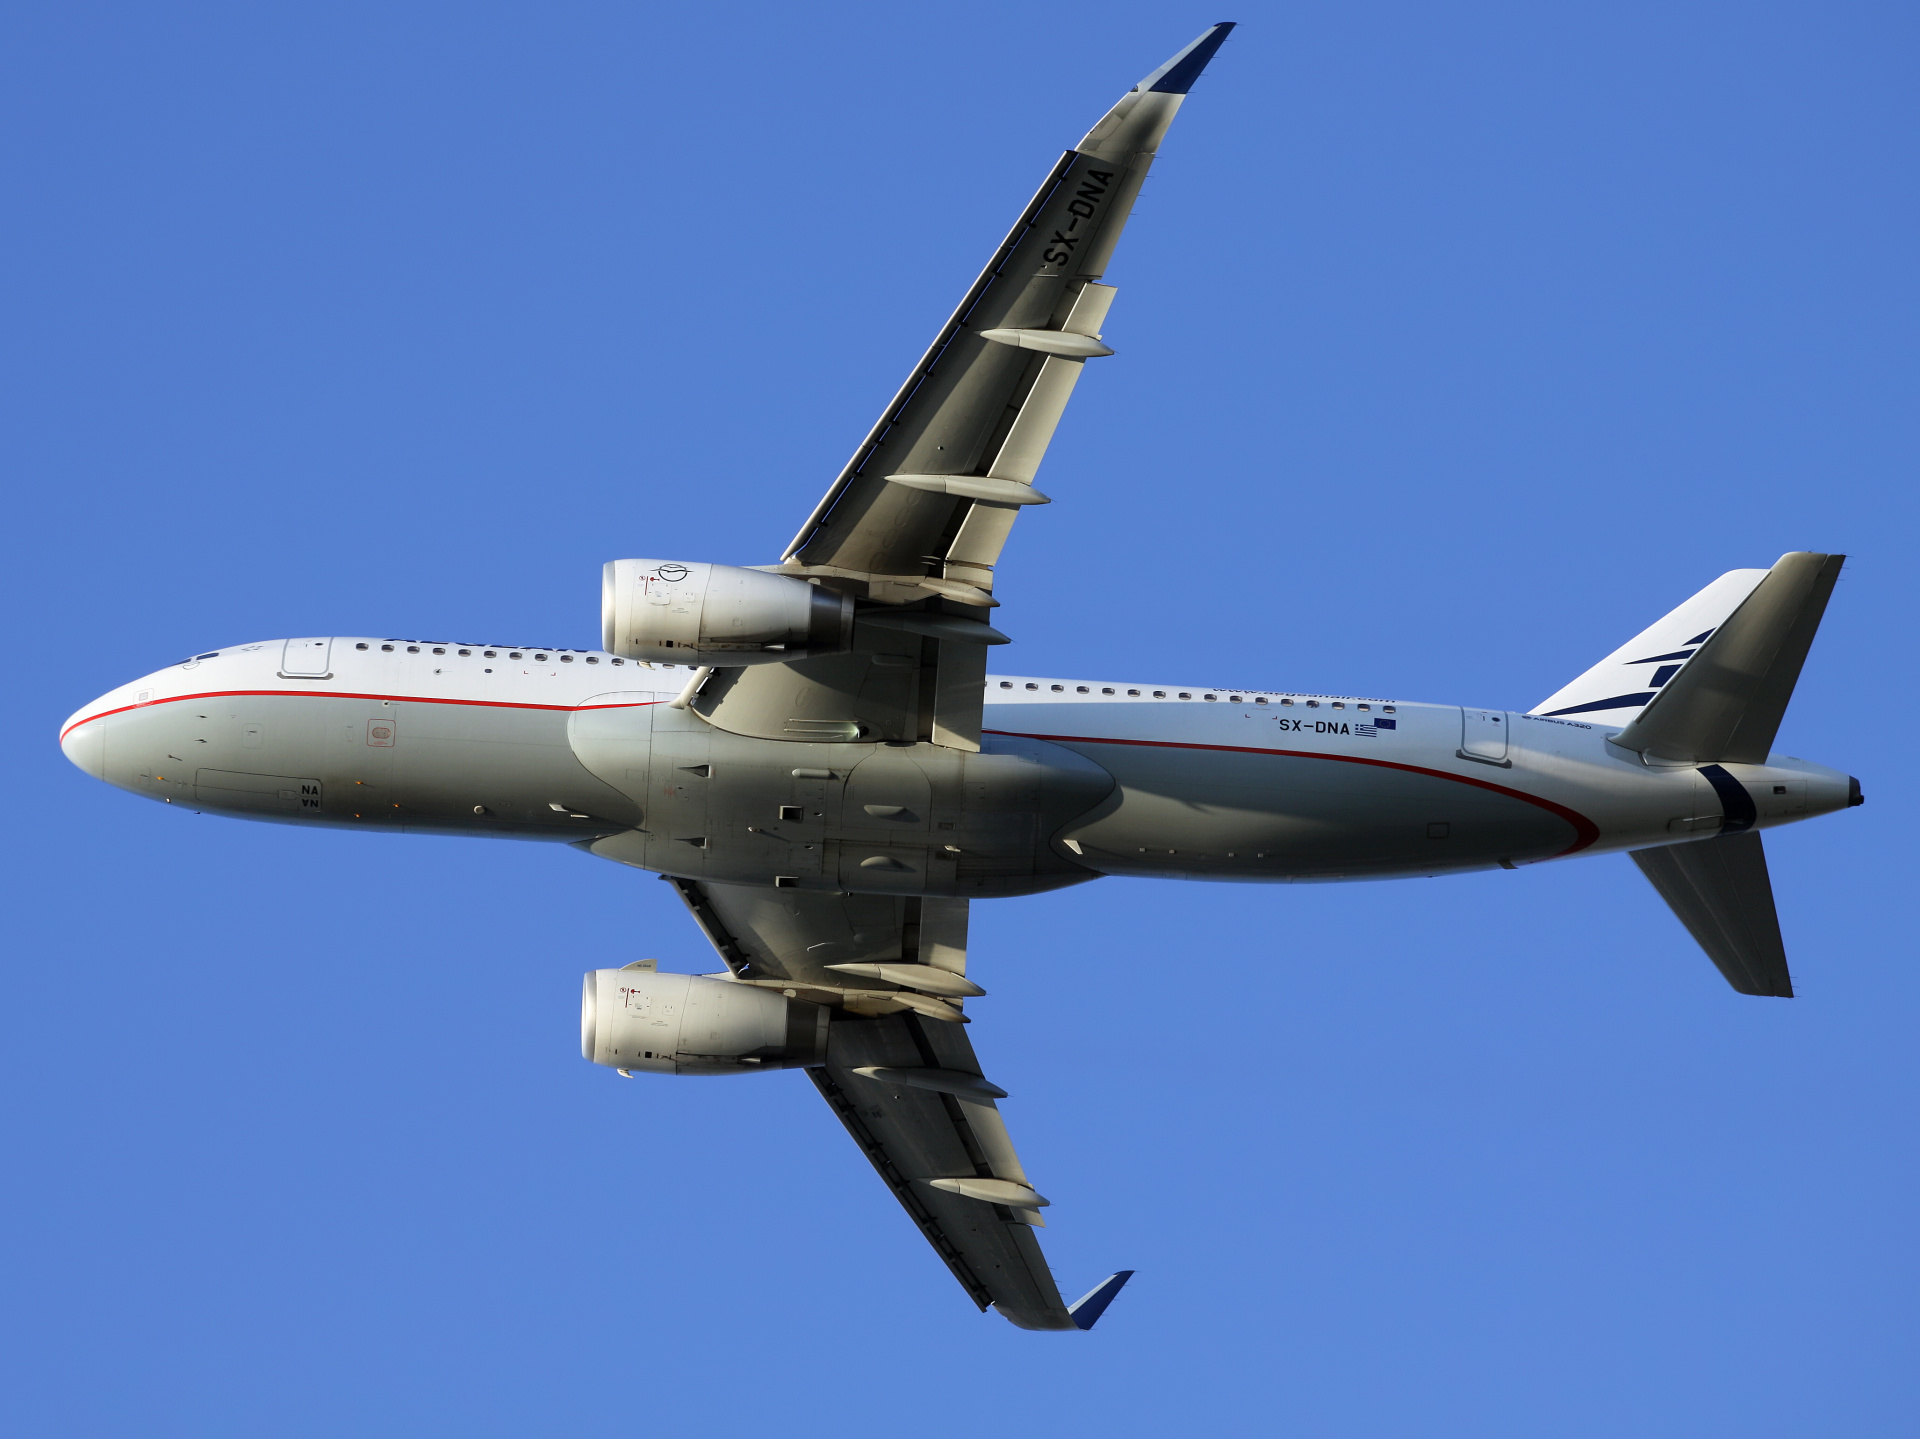 SX-DNA (Aircraft » EPWA Spotting » Airbus A320-200 » Aegean Airlines)